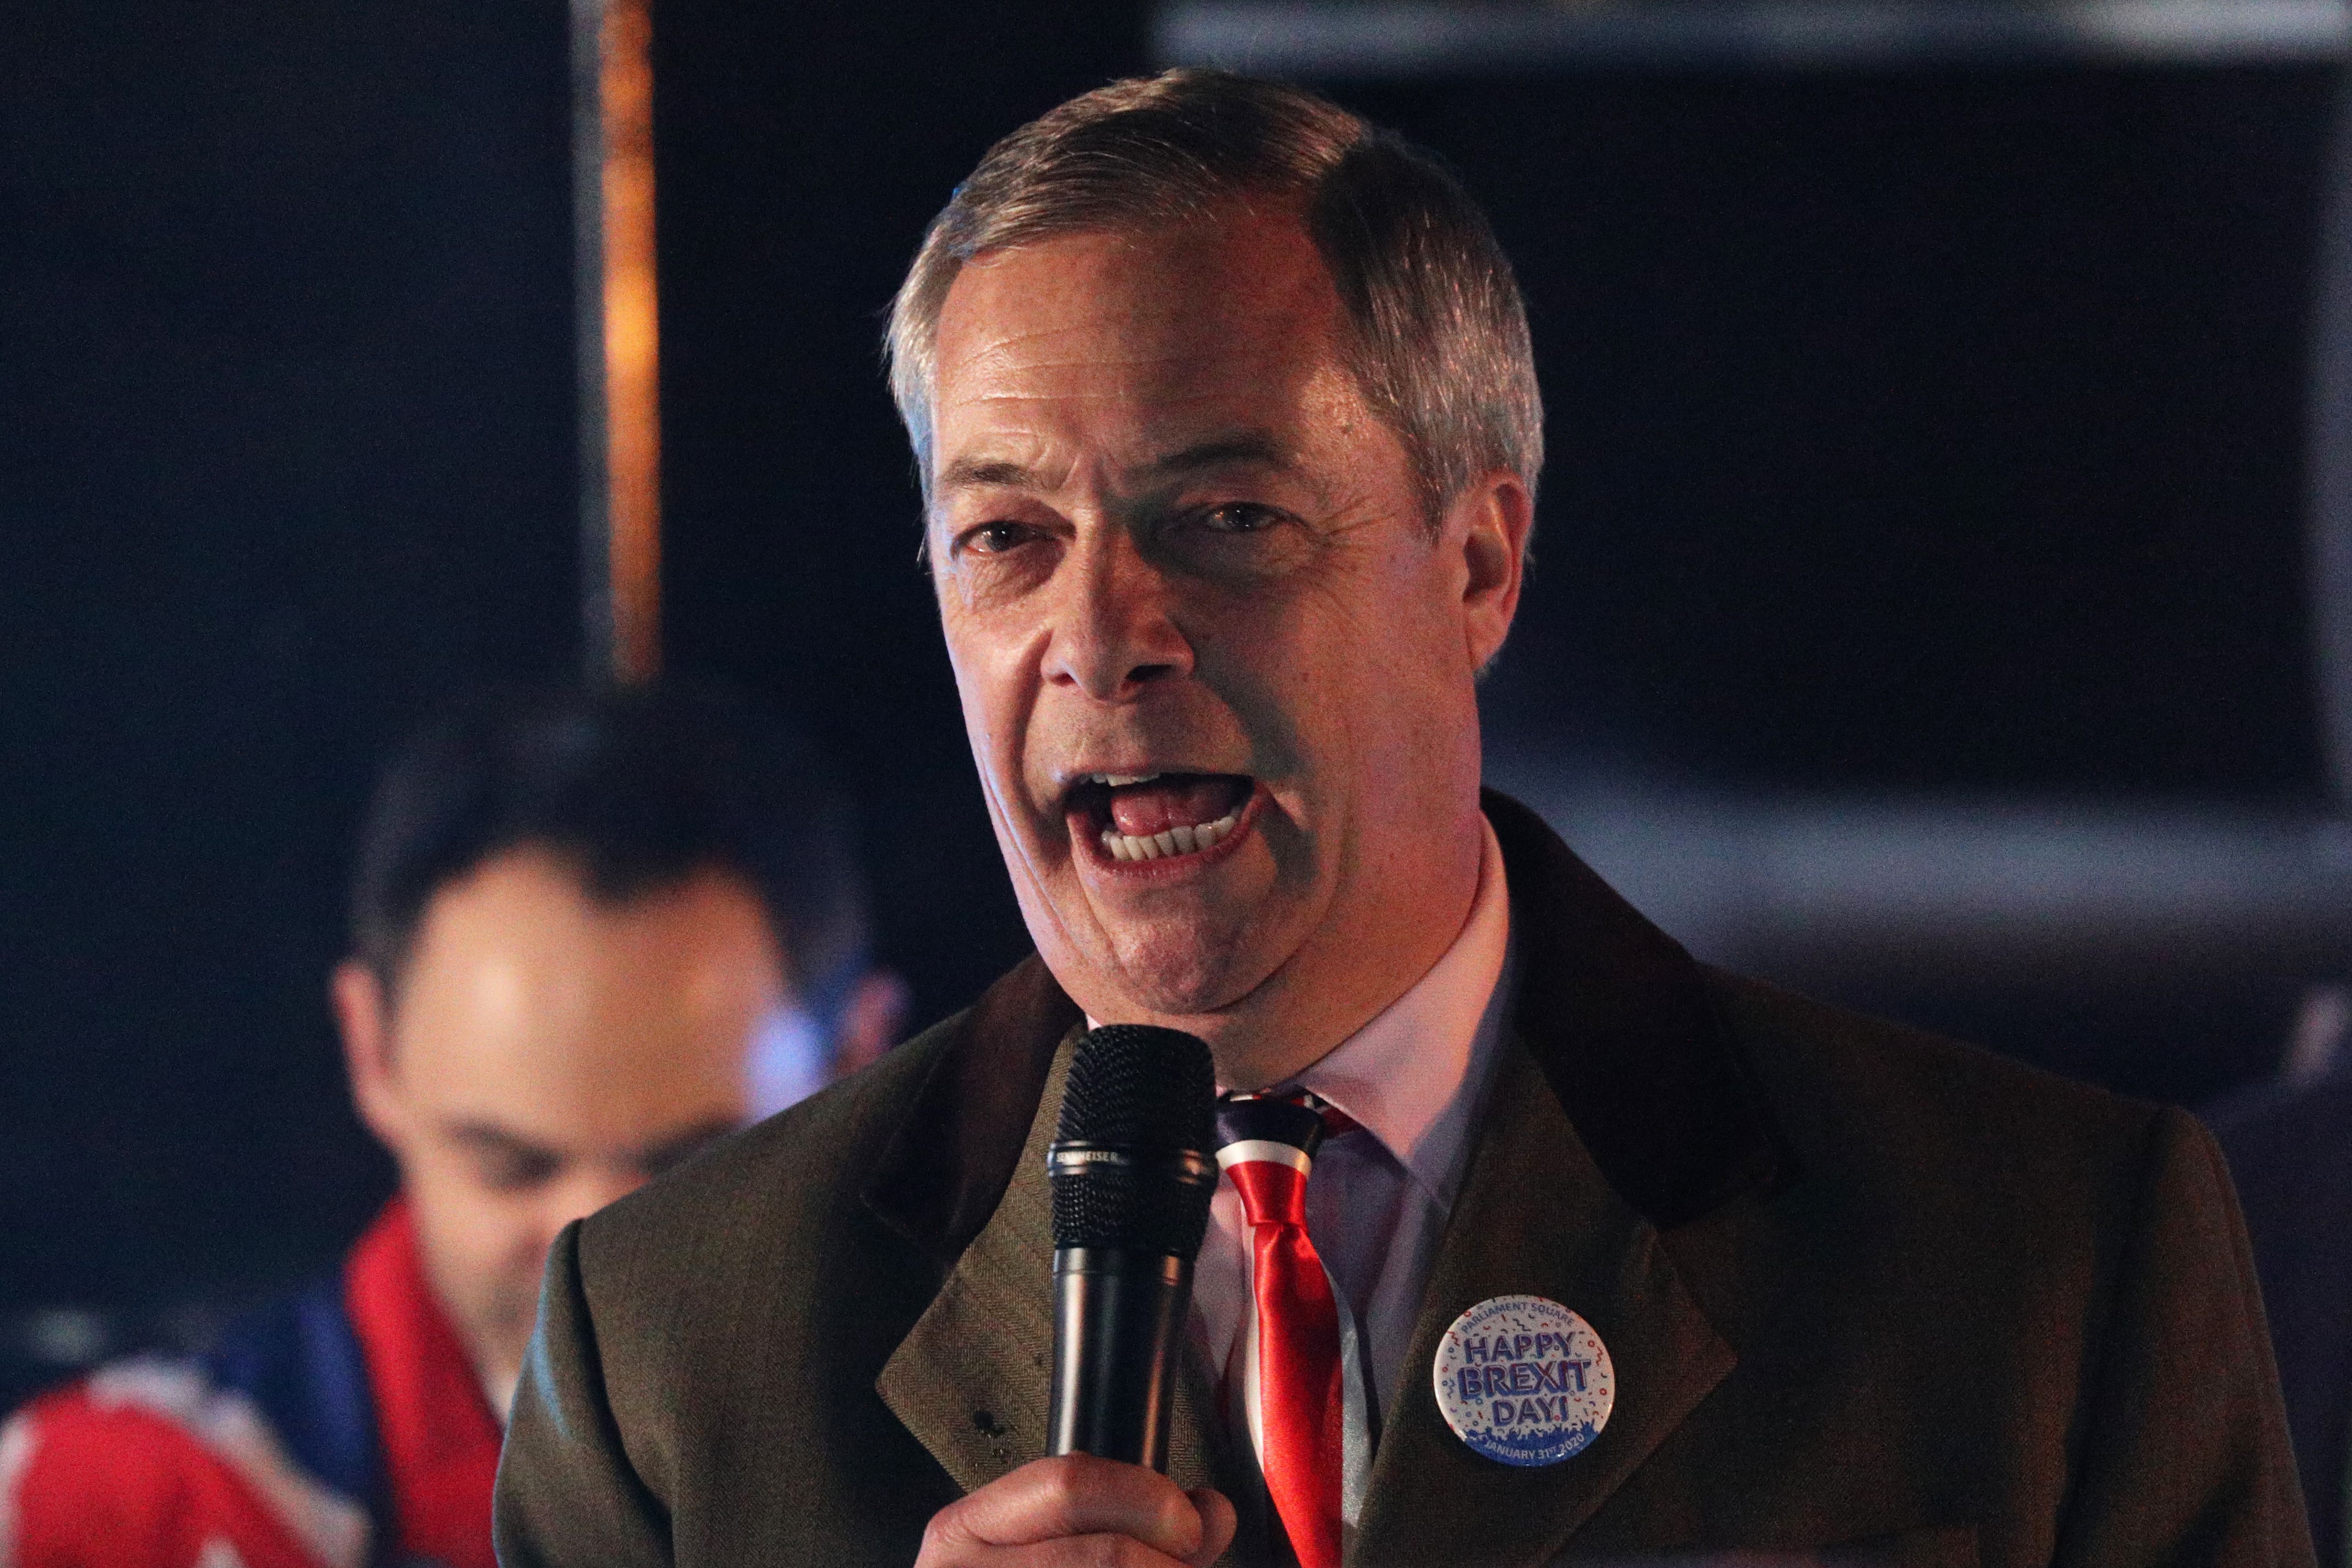 Nigel Farage’s bank accounts were closed by Coutts